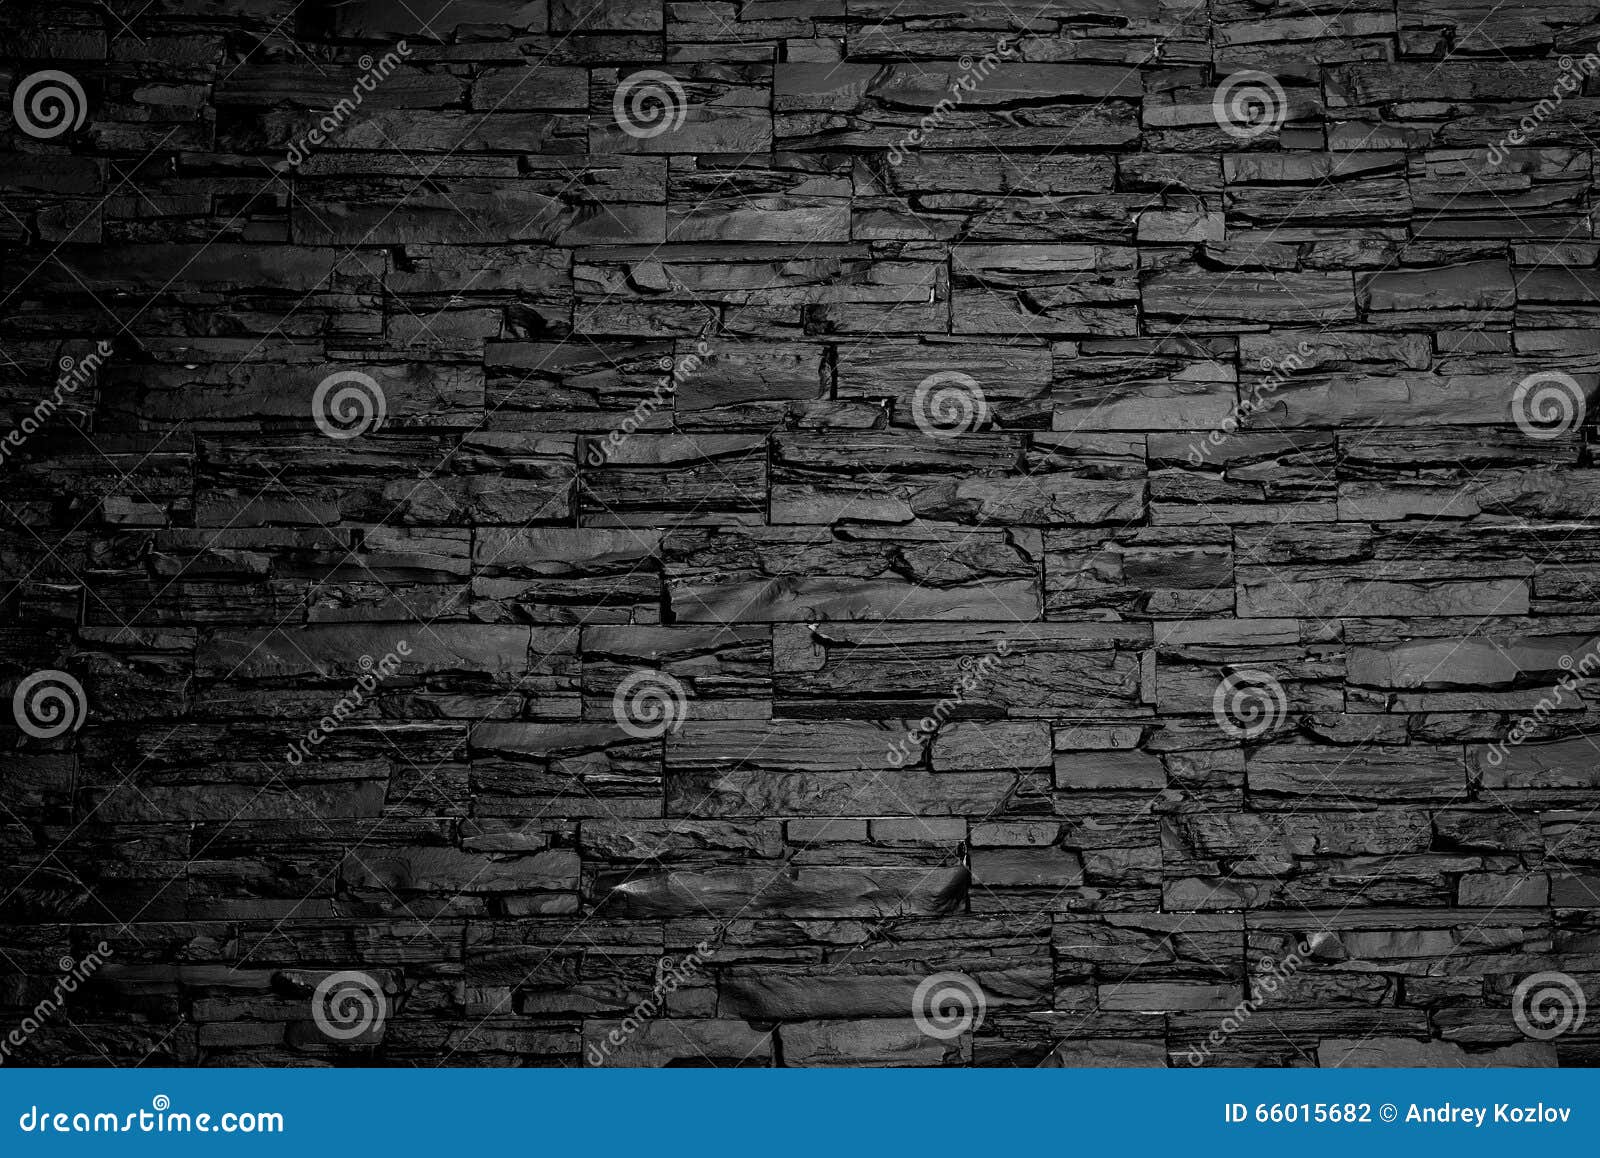 charcoal stone wall background texture black and white